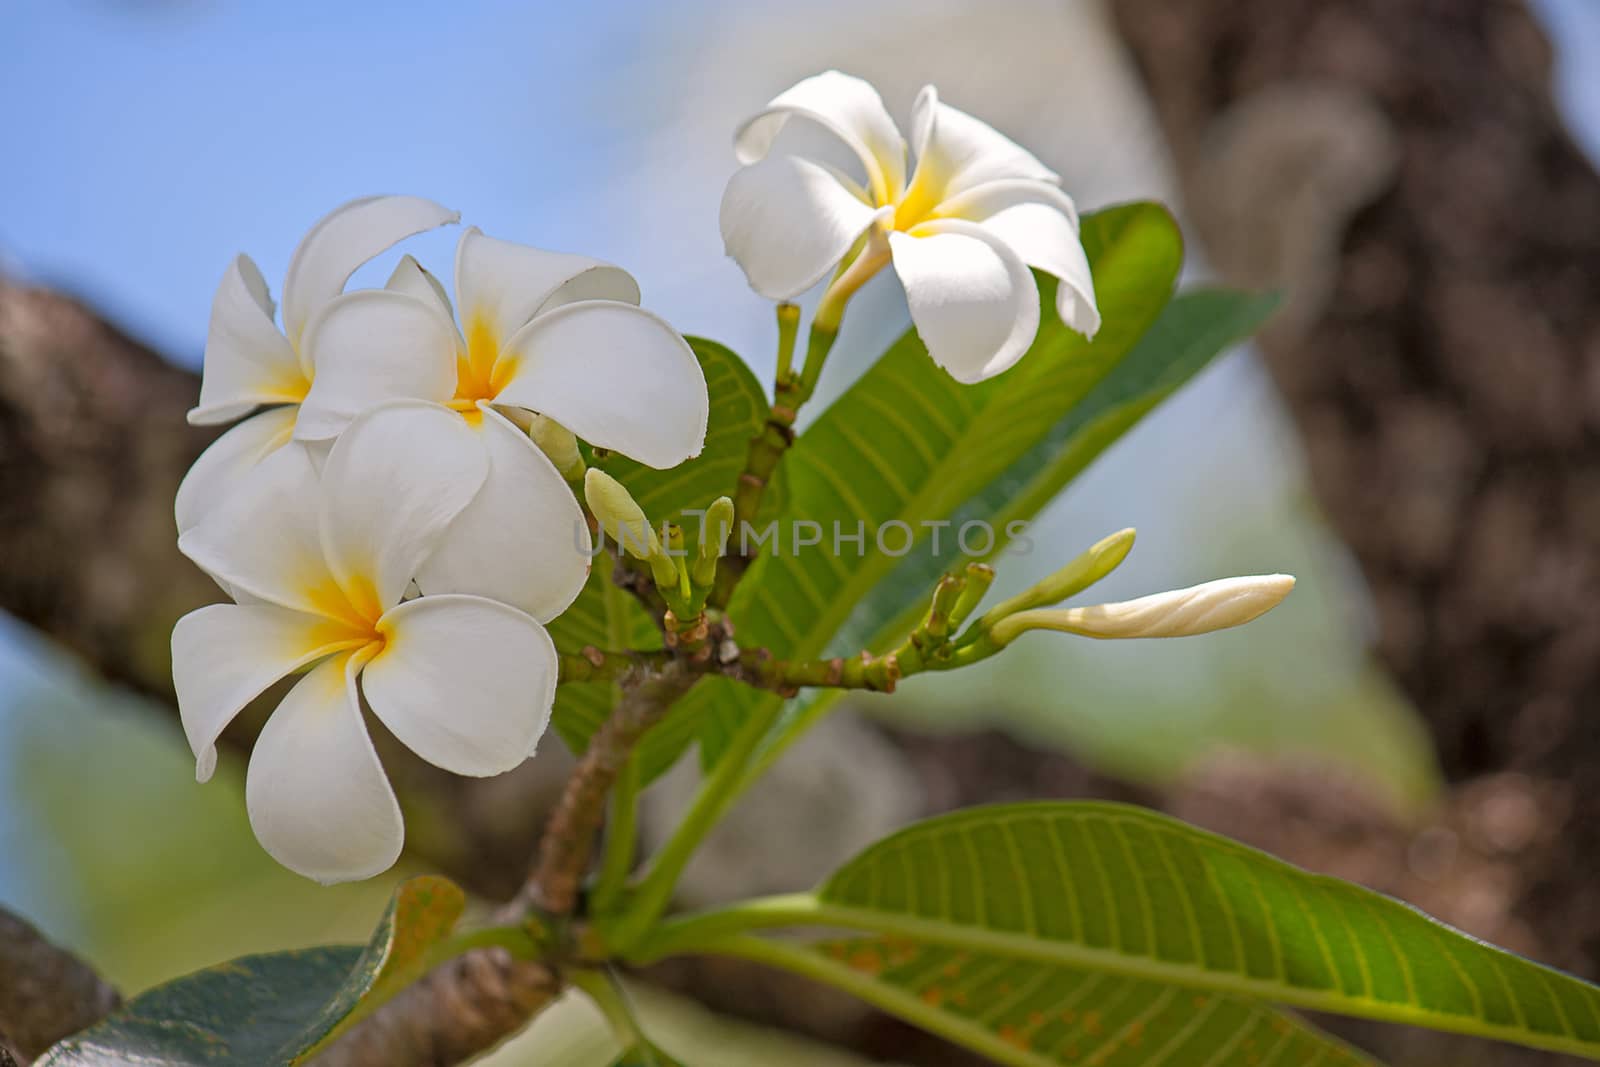 White plumeria flowers on a background of leaves, Thailand.